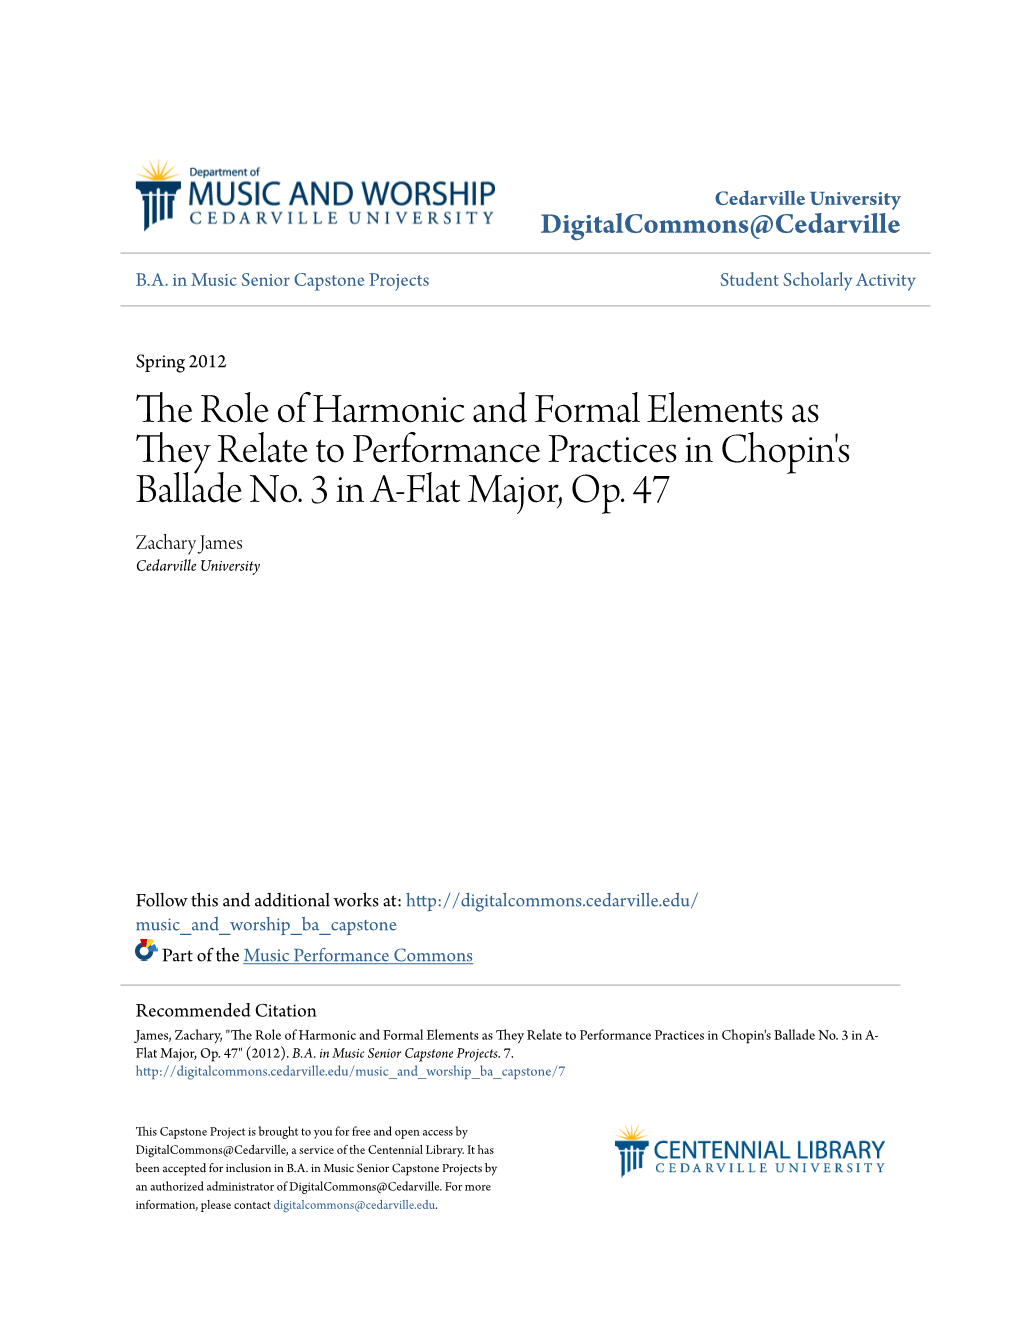 The Role of Harmonic and Formal Elements As They Relate to Performance Practices in Chopin's Ballade No